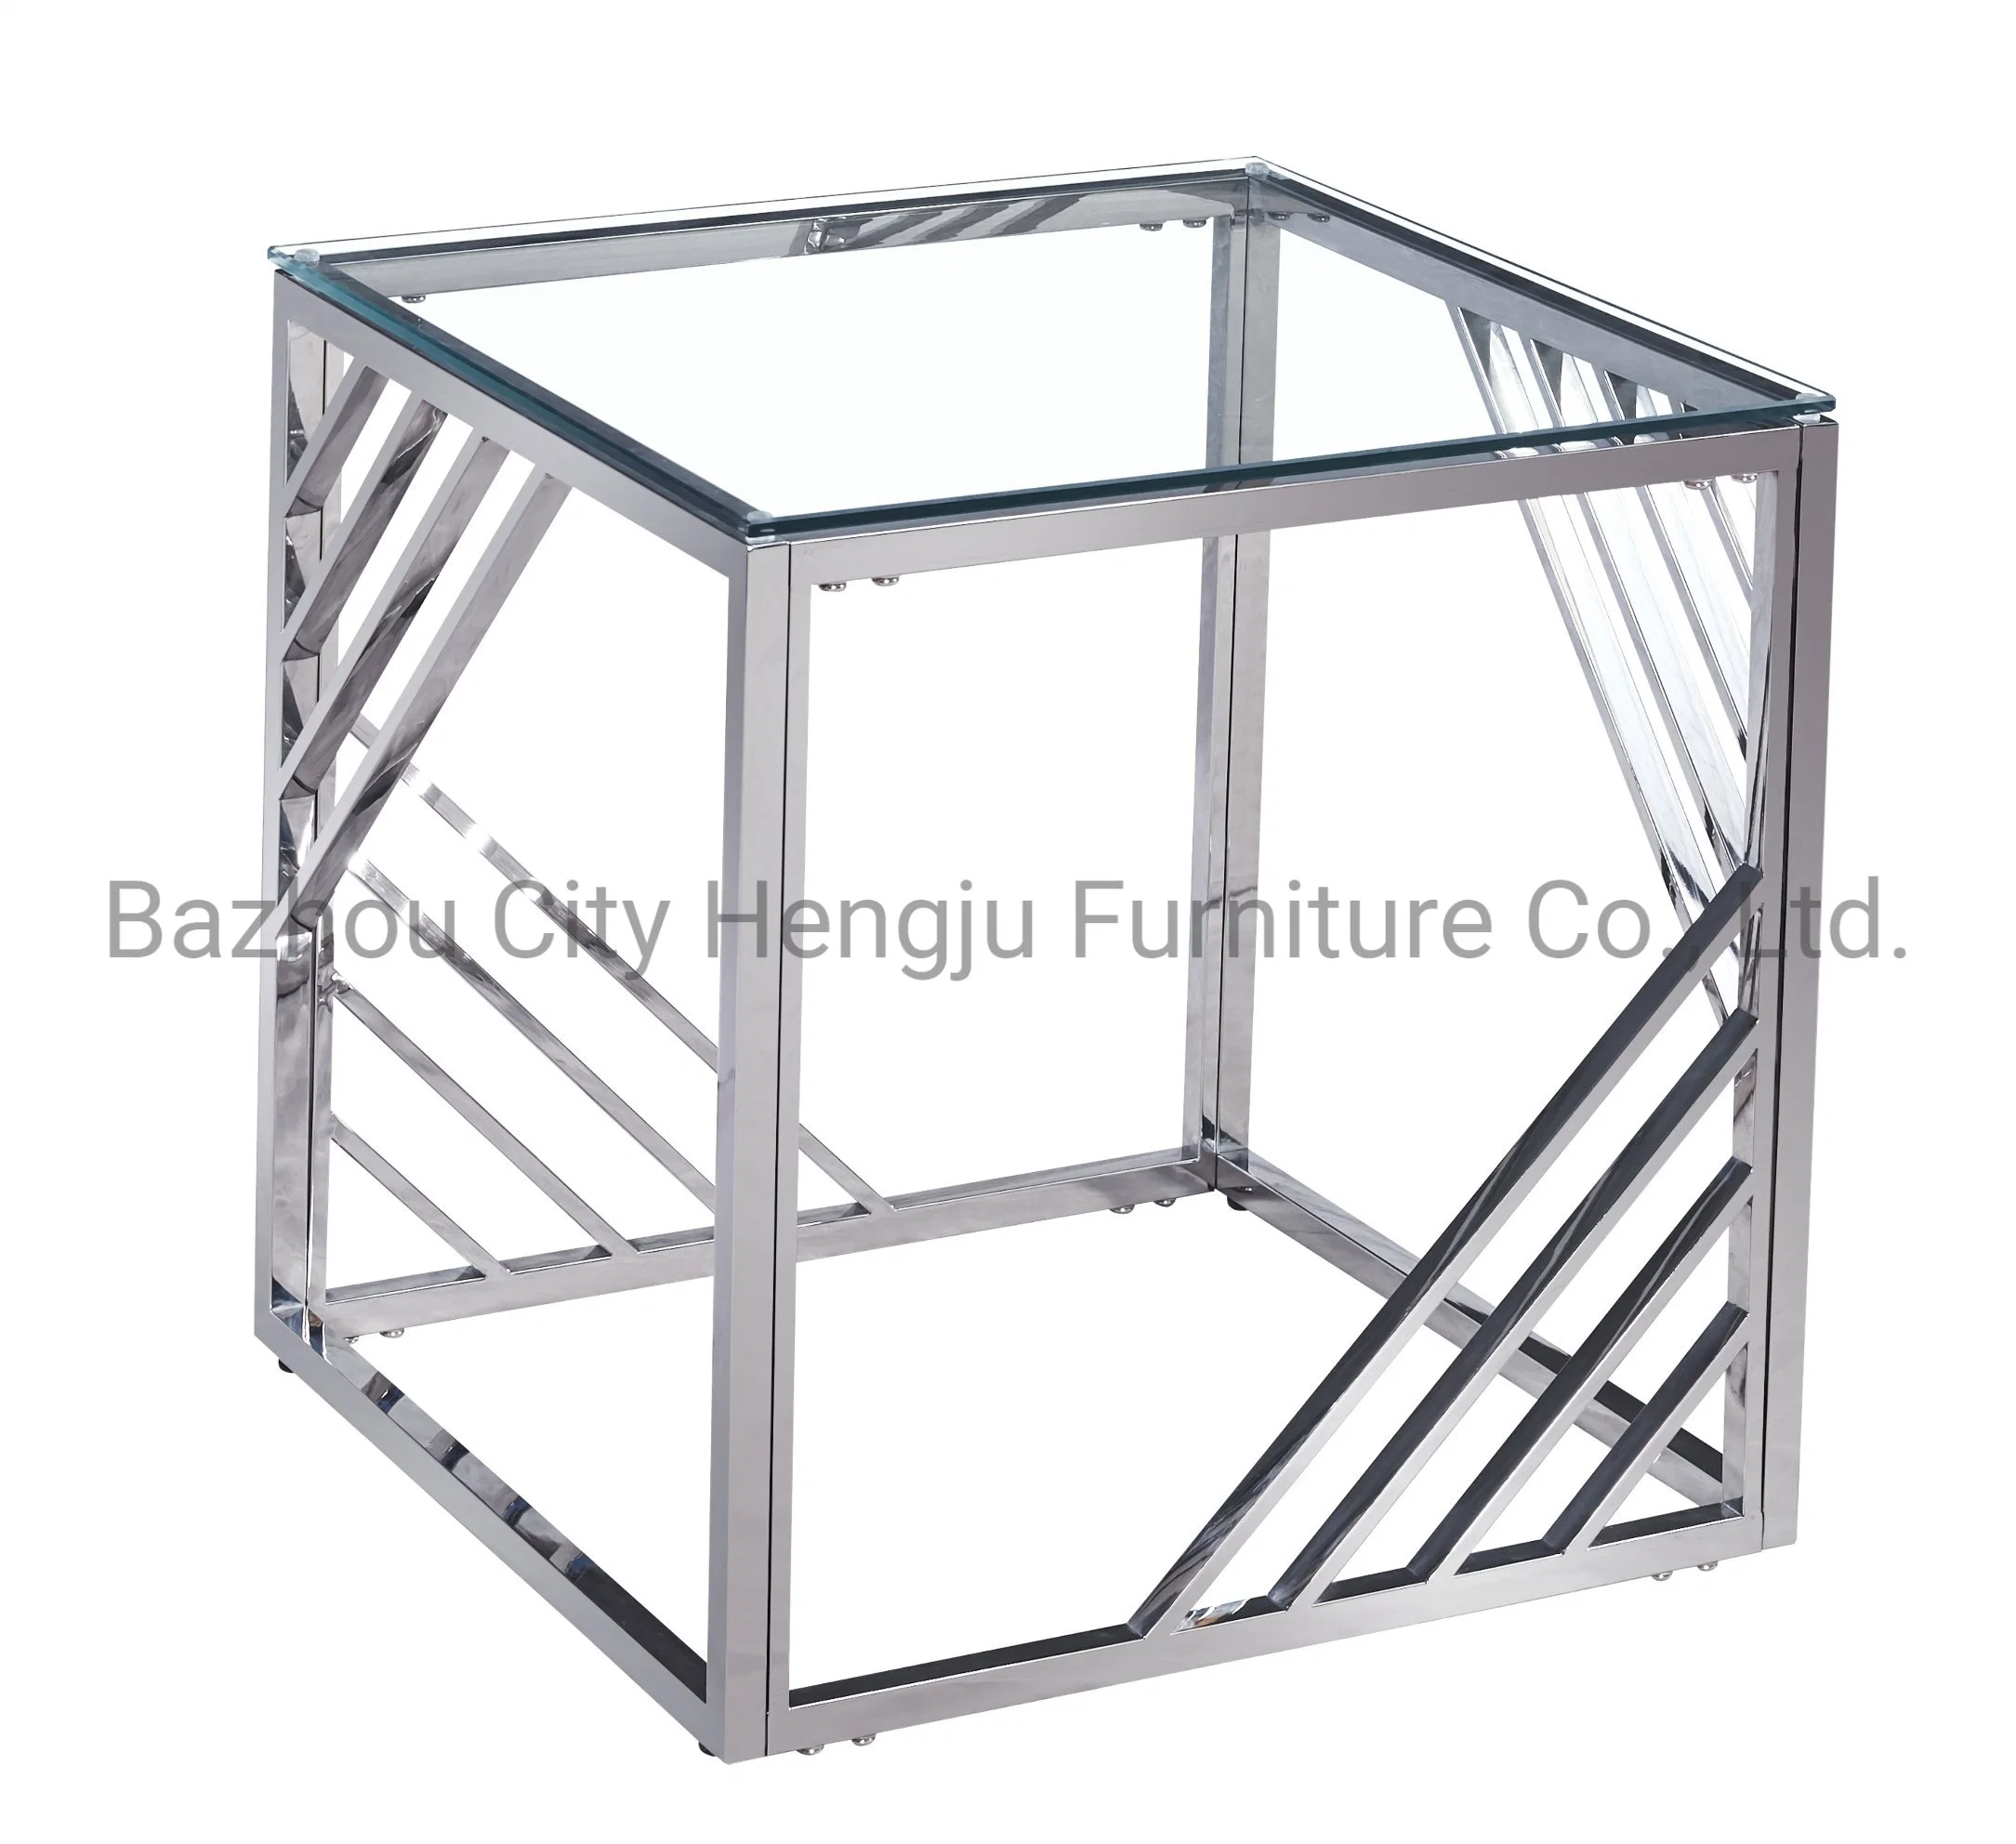 Small Spaces Office Side Table Glass Finish End Table Coffee Table for Living Room Bedroom Hotel Dining Room Furniture Moderm Square Stainless Steel Tables